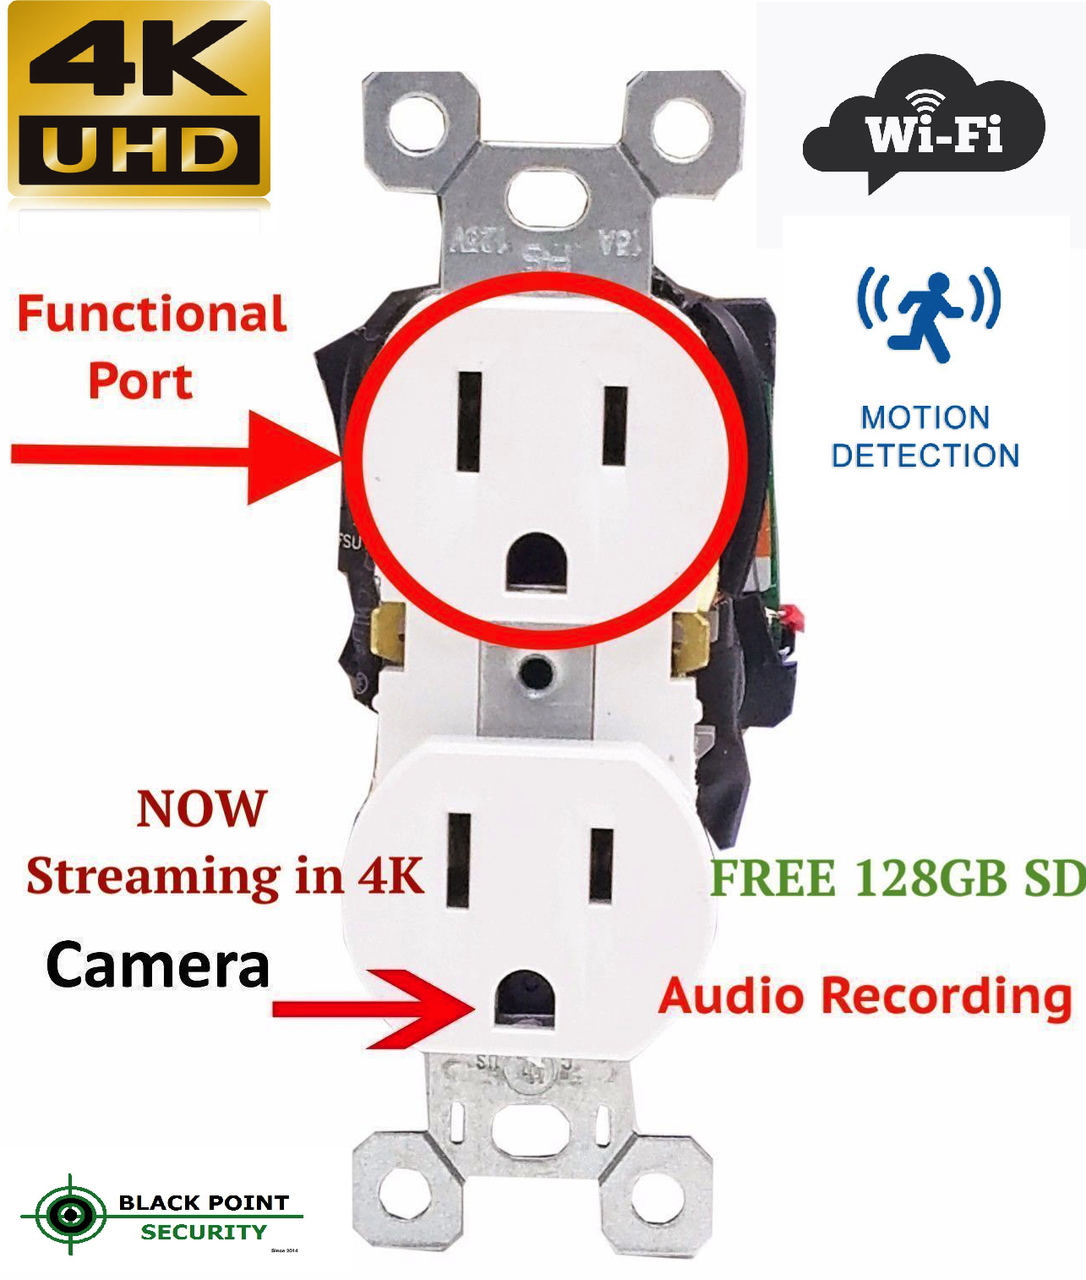 Functional Wall Outlet Hidden Streaming Camera